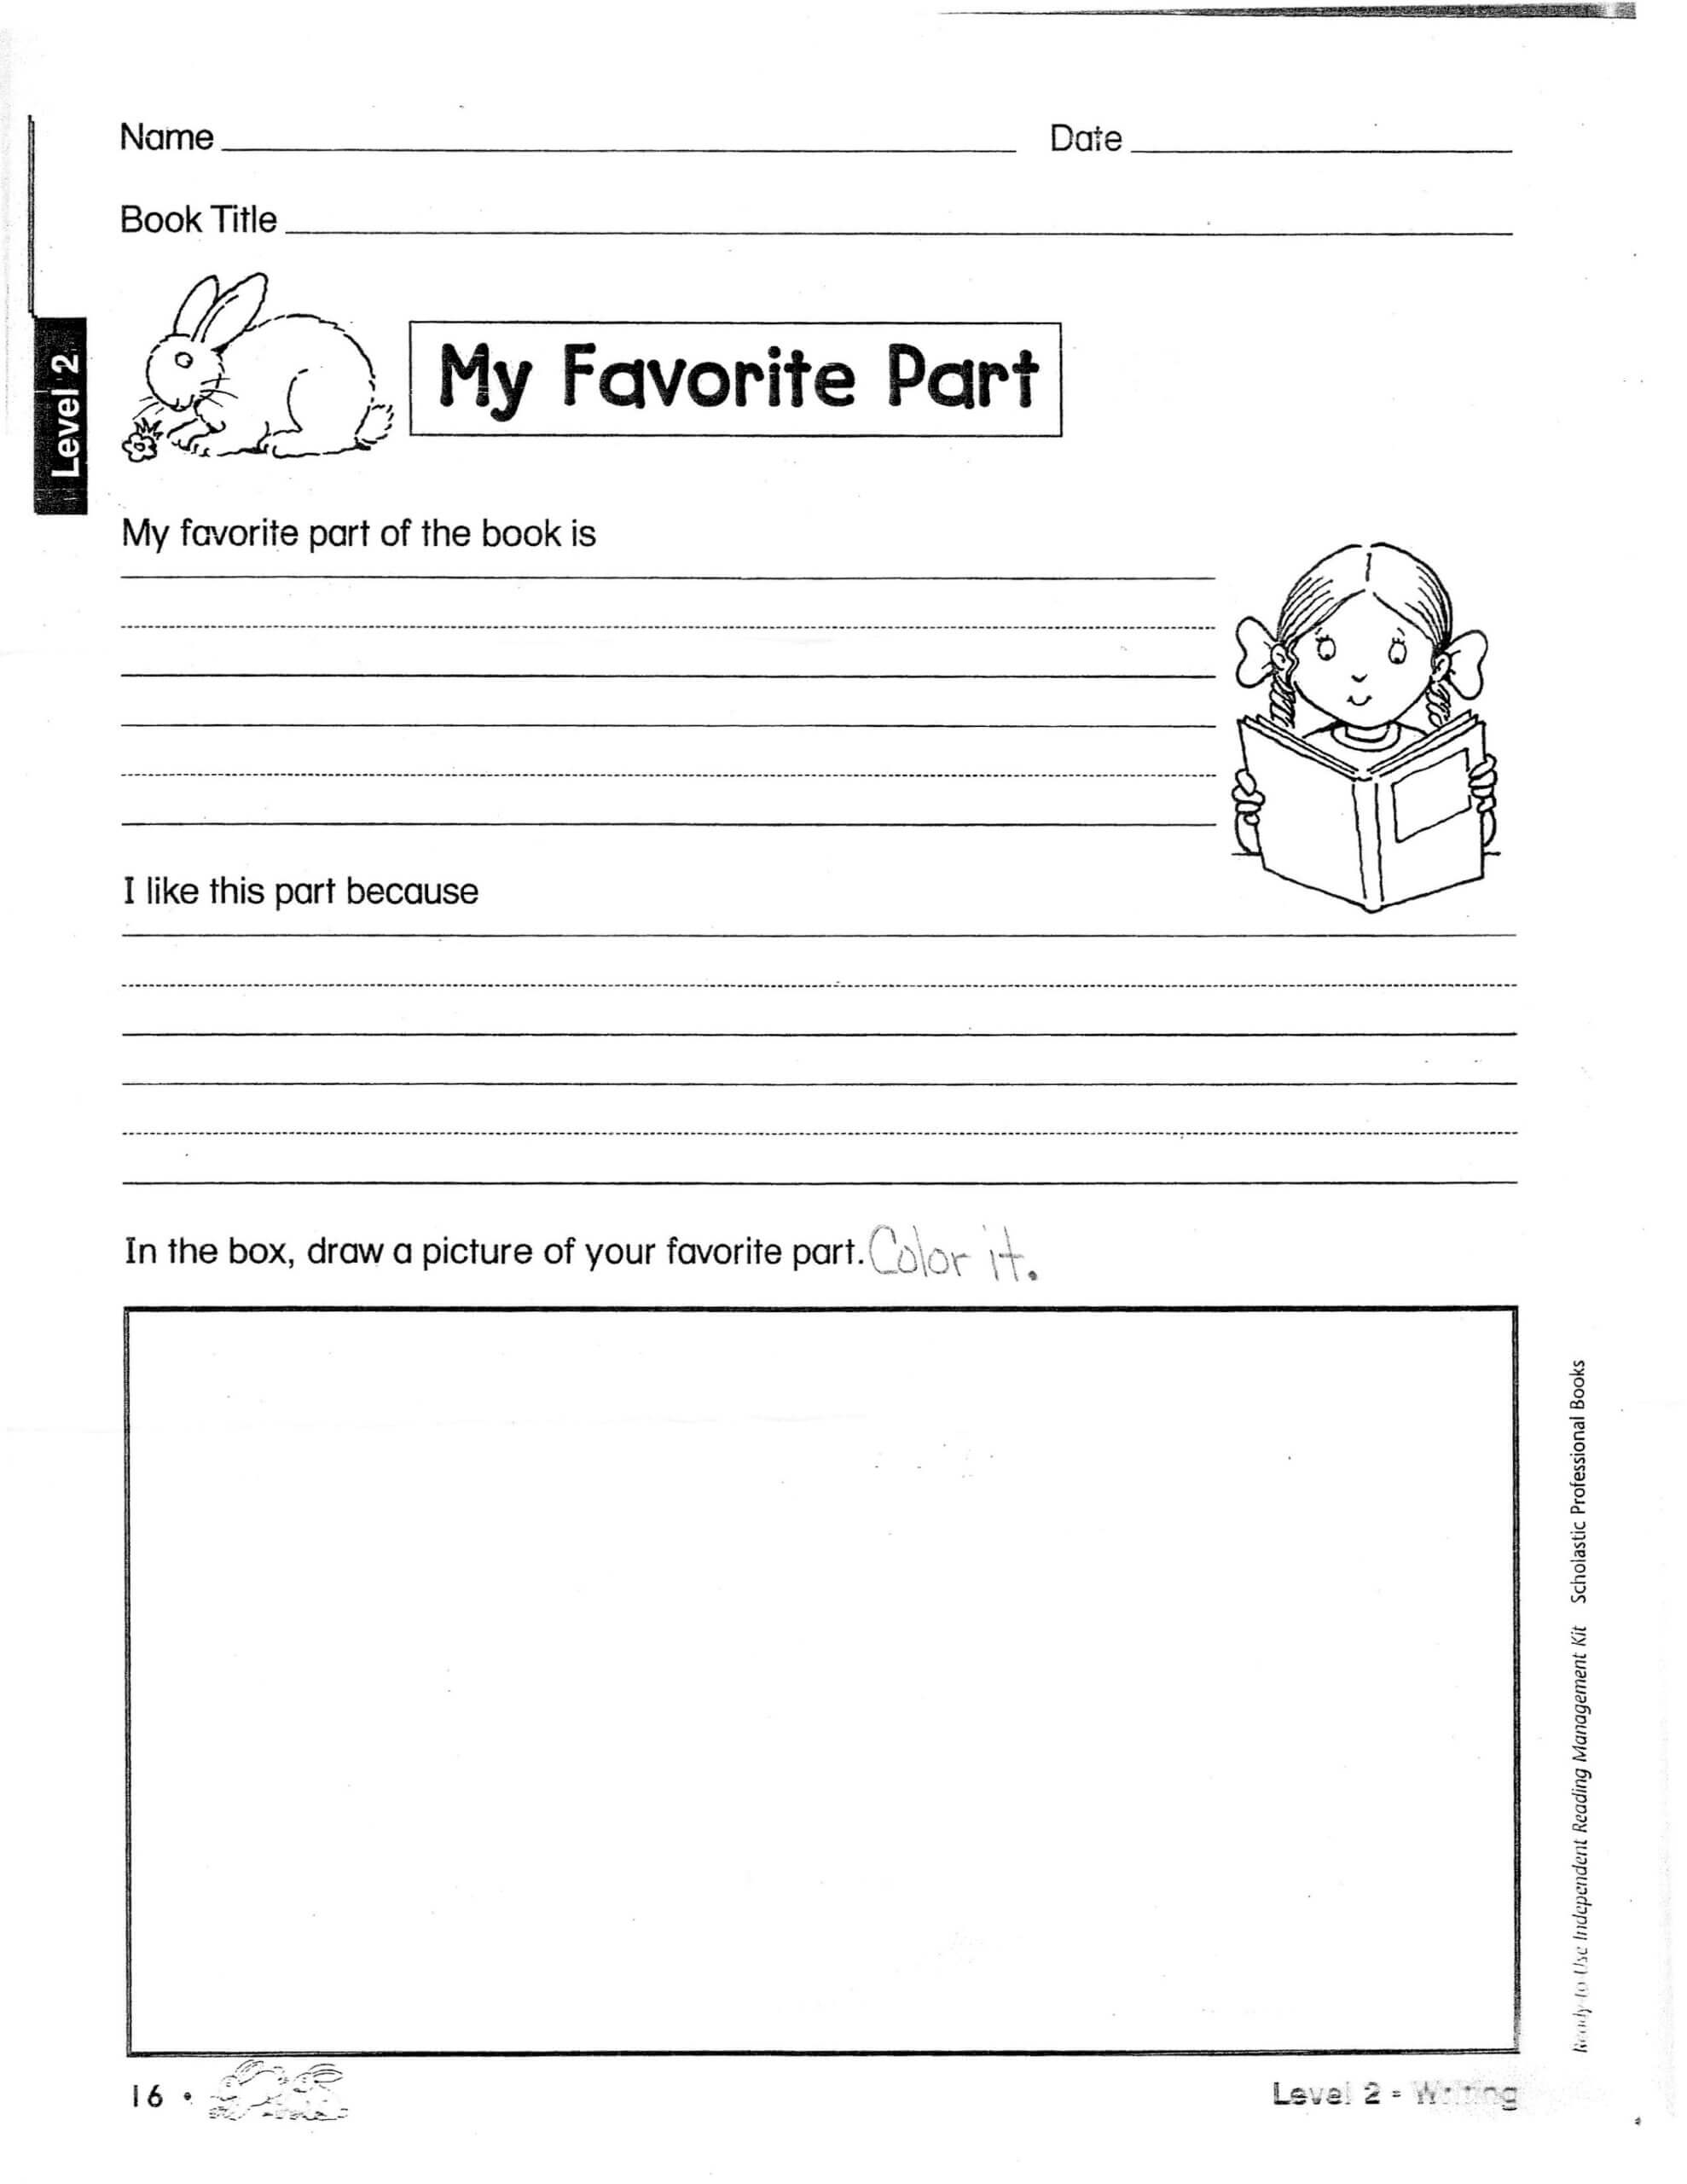 Worksheet For Book Report | Printable Worksheets And Within Book Report Template 2Nd Grade